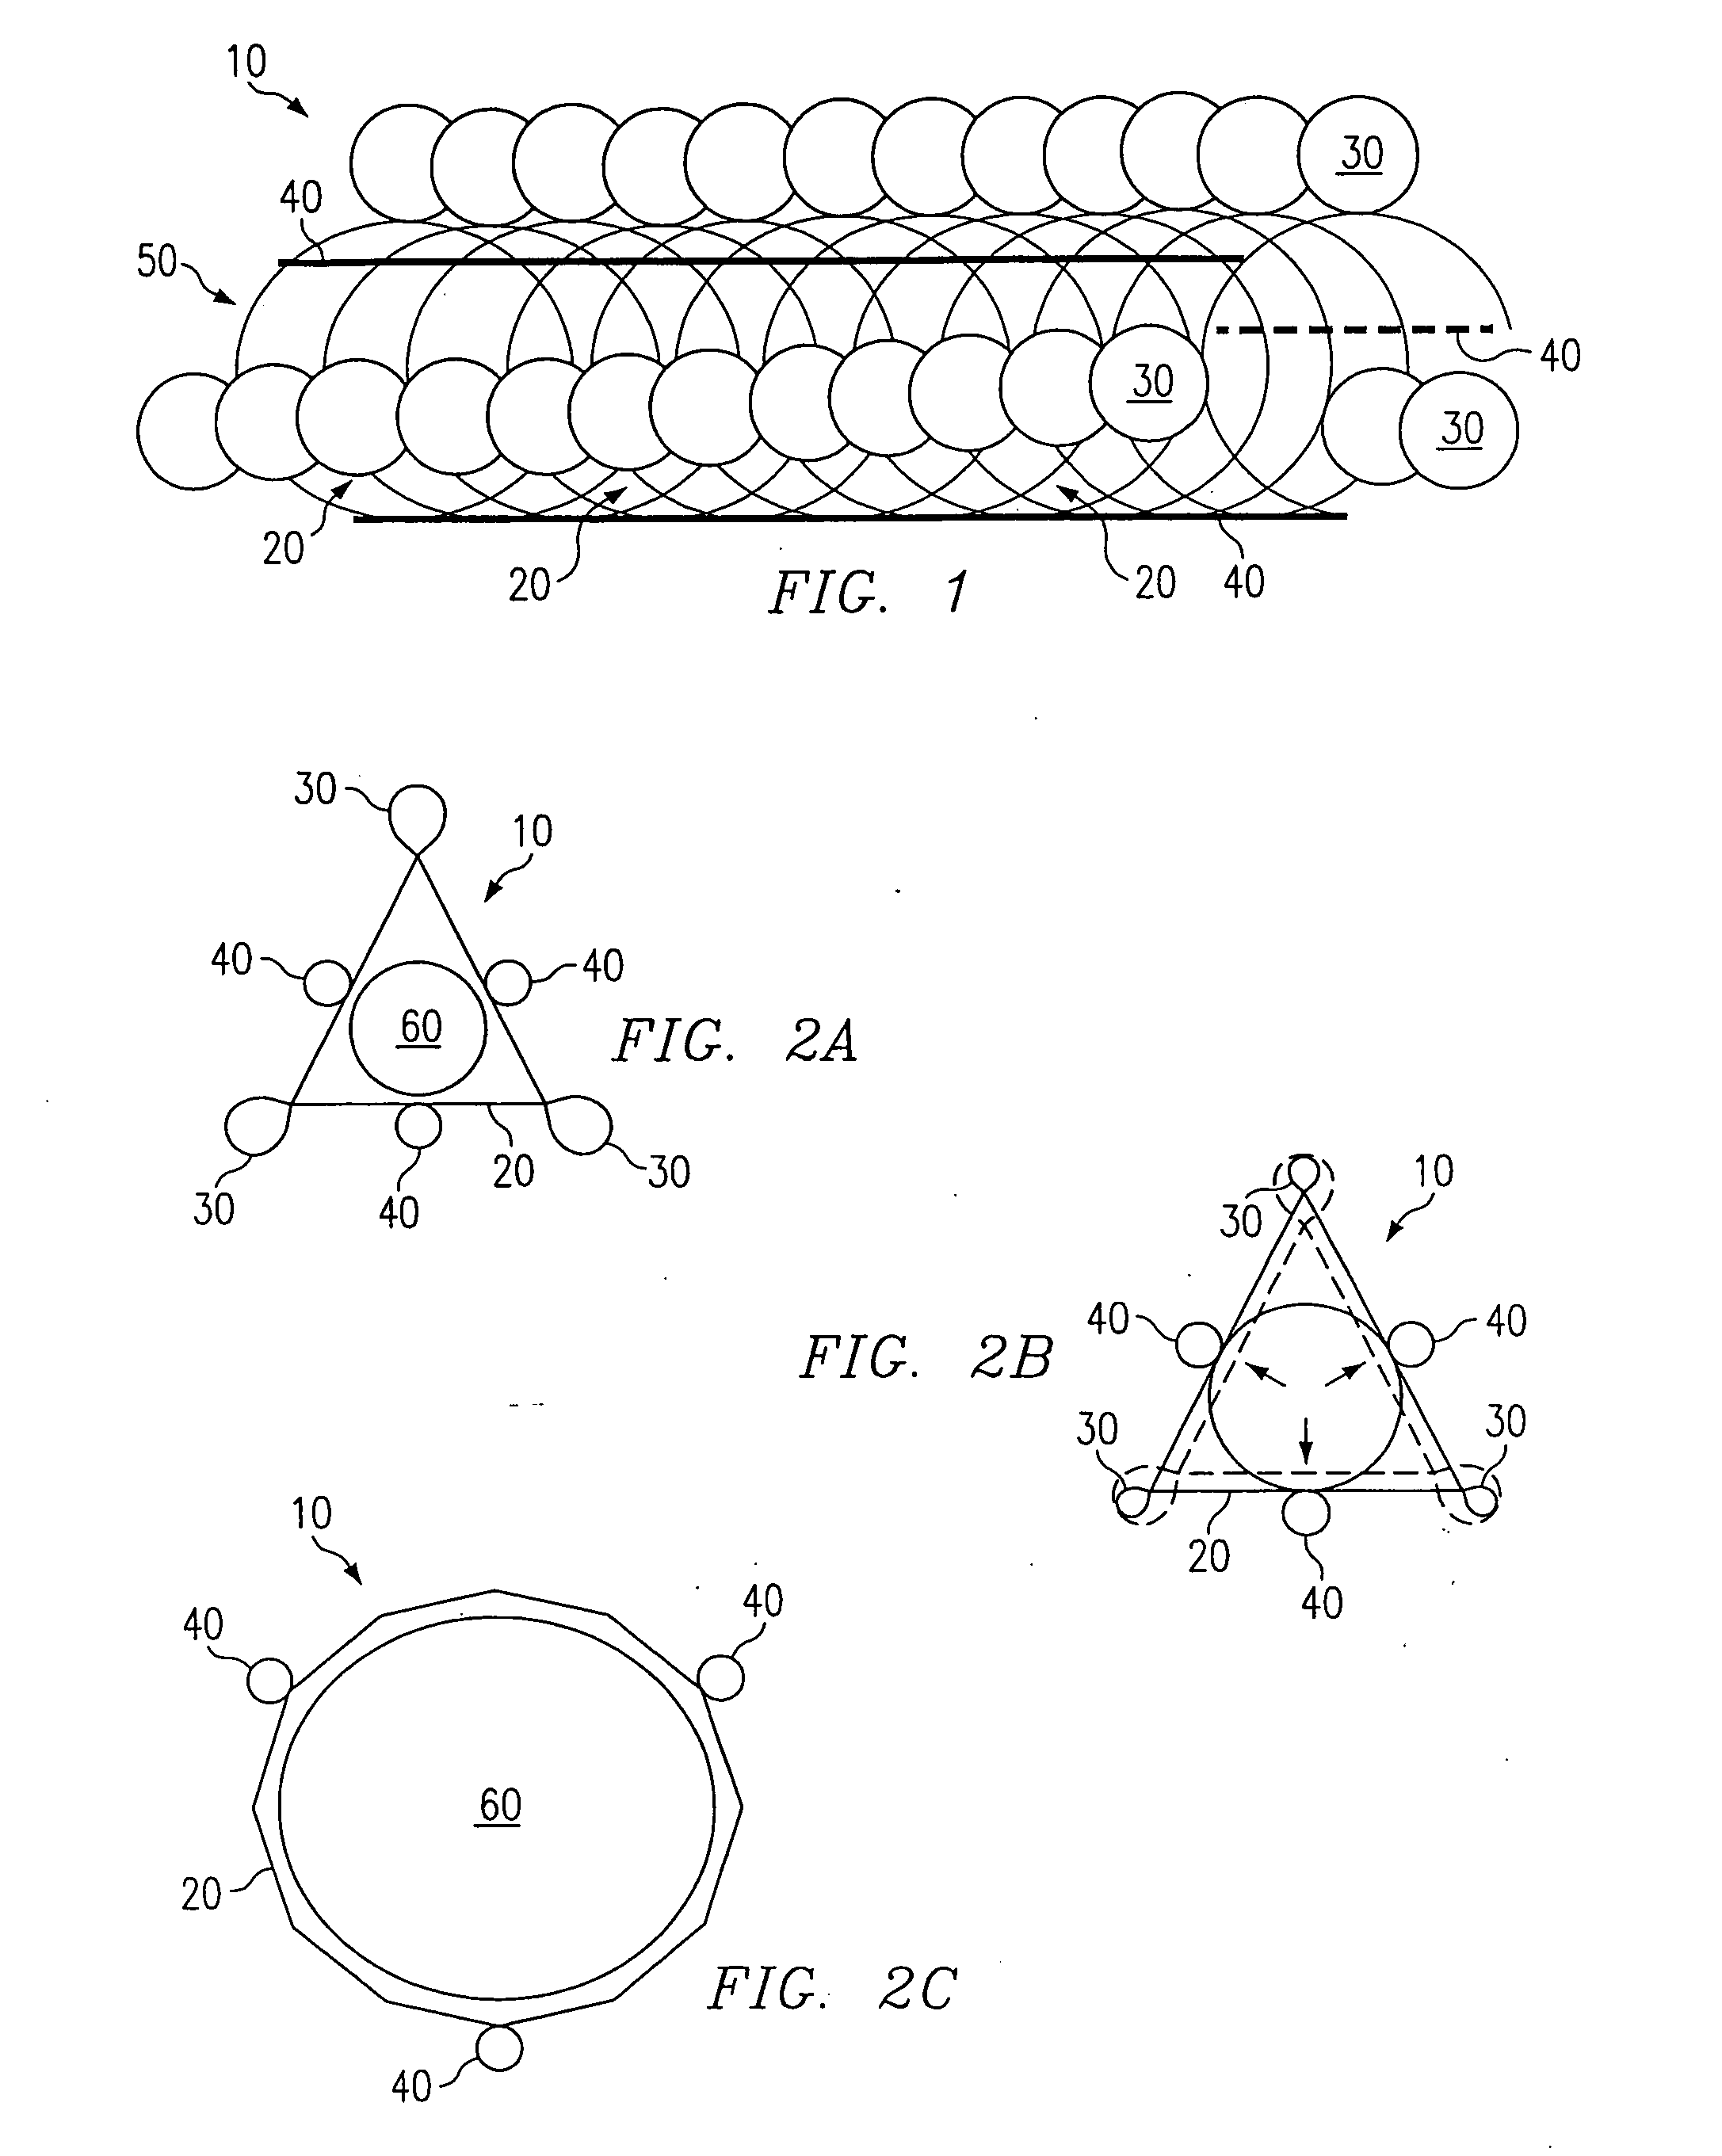 Expandable biodegradable polymeric stents for combined mechanical support and pharmacological or radiation therapy